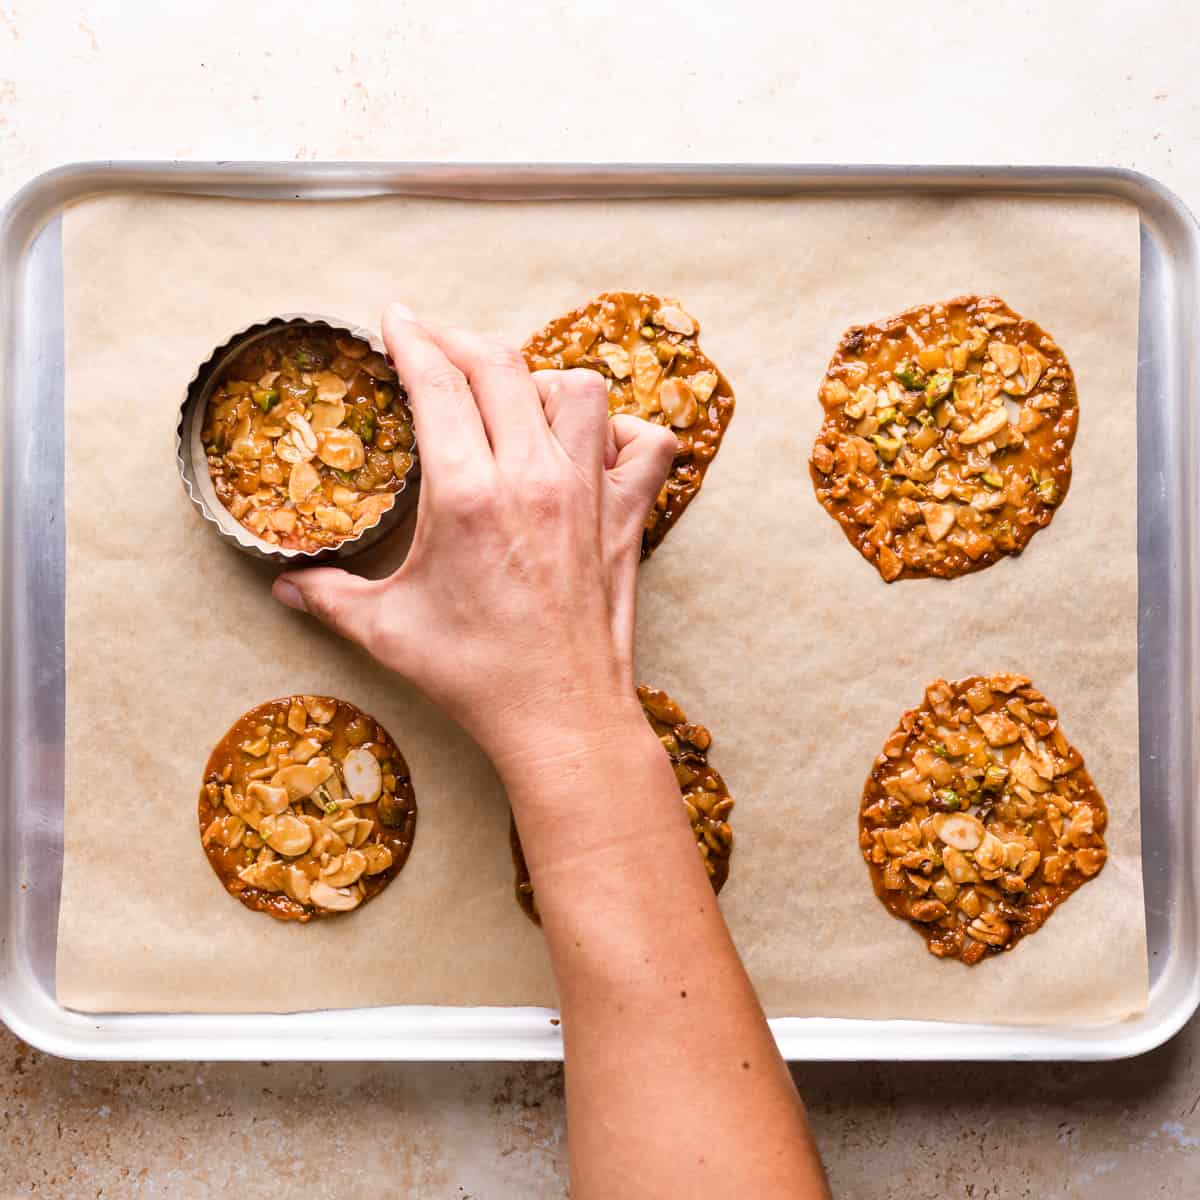 baked florentines with almonds and pistachios being pressed into rounds with cookie cutter.